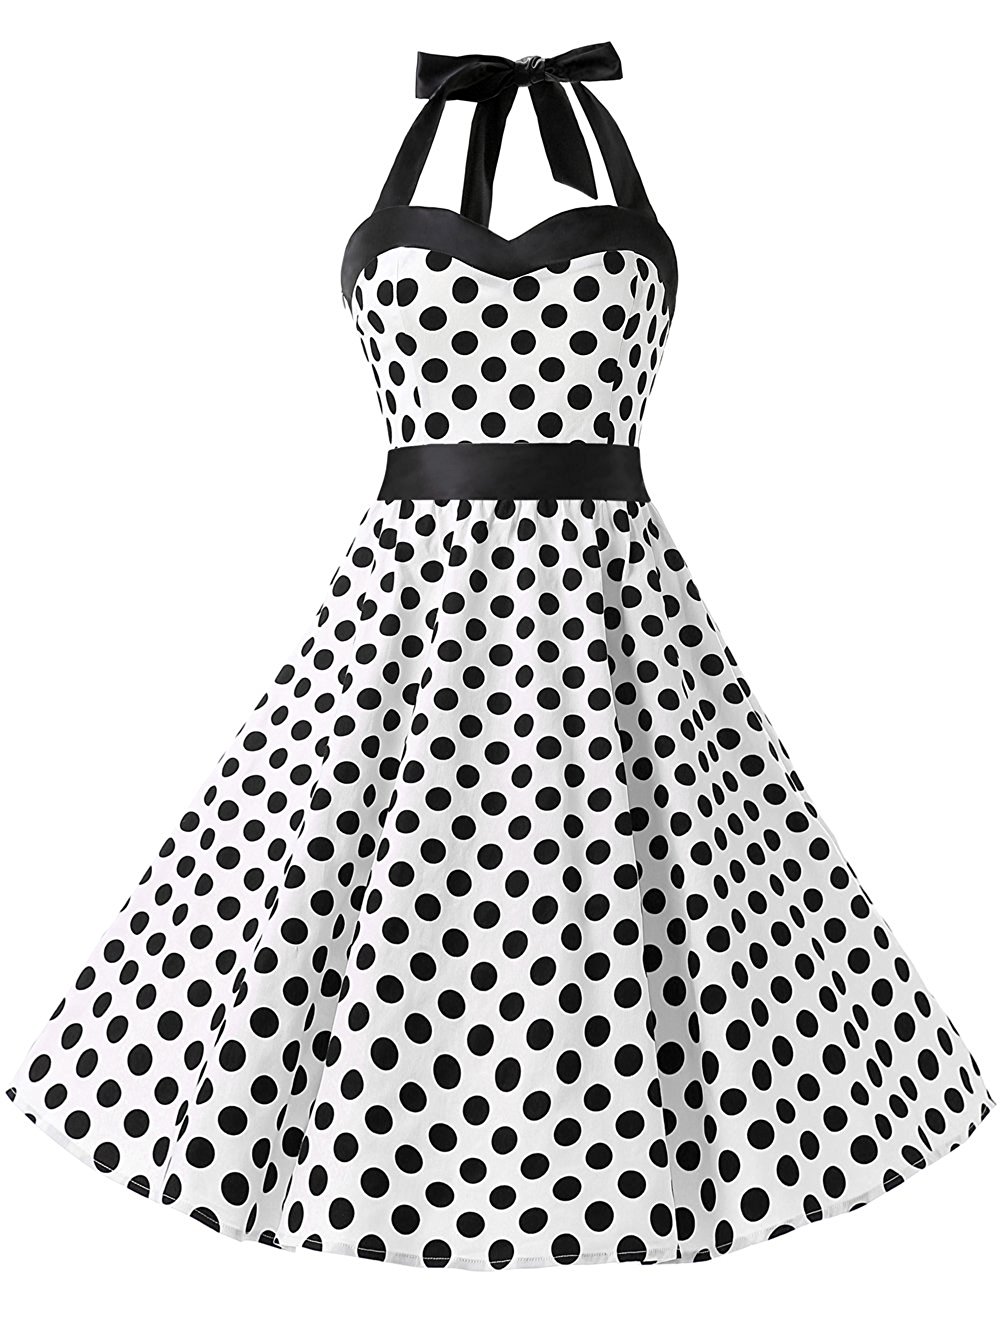 50s Vintage Style Halter White Polka Dots Swing Party Dress on Luulla